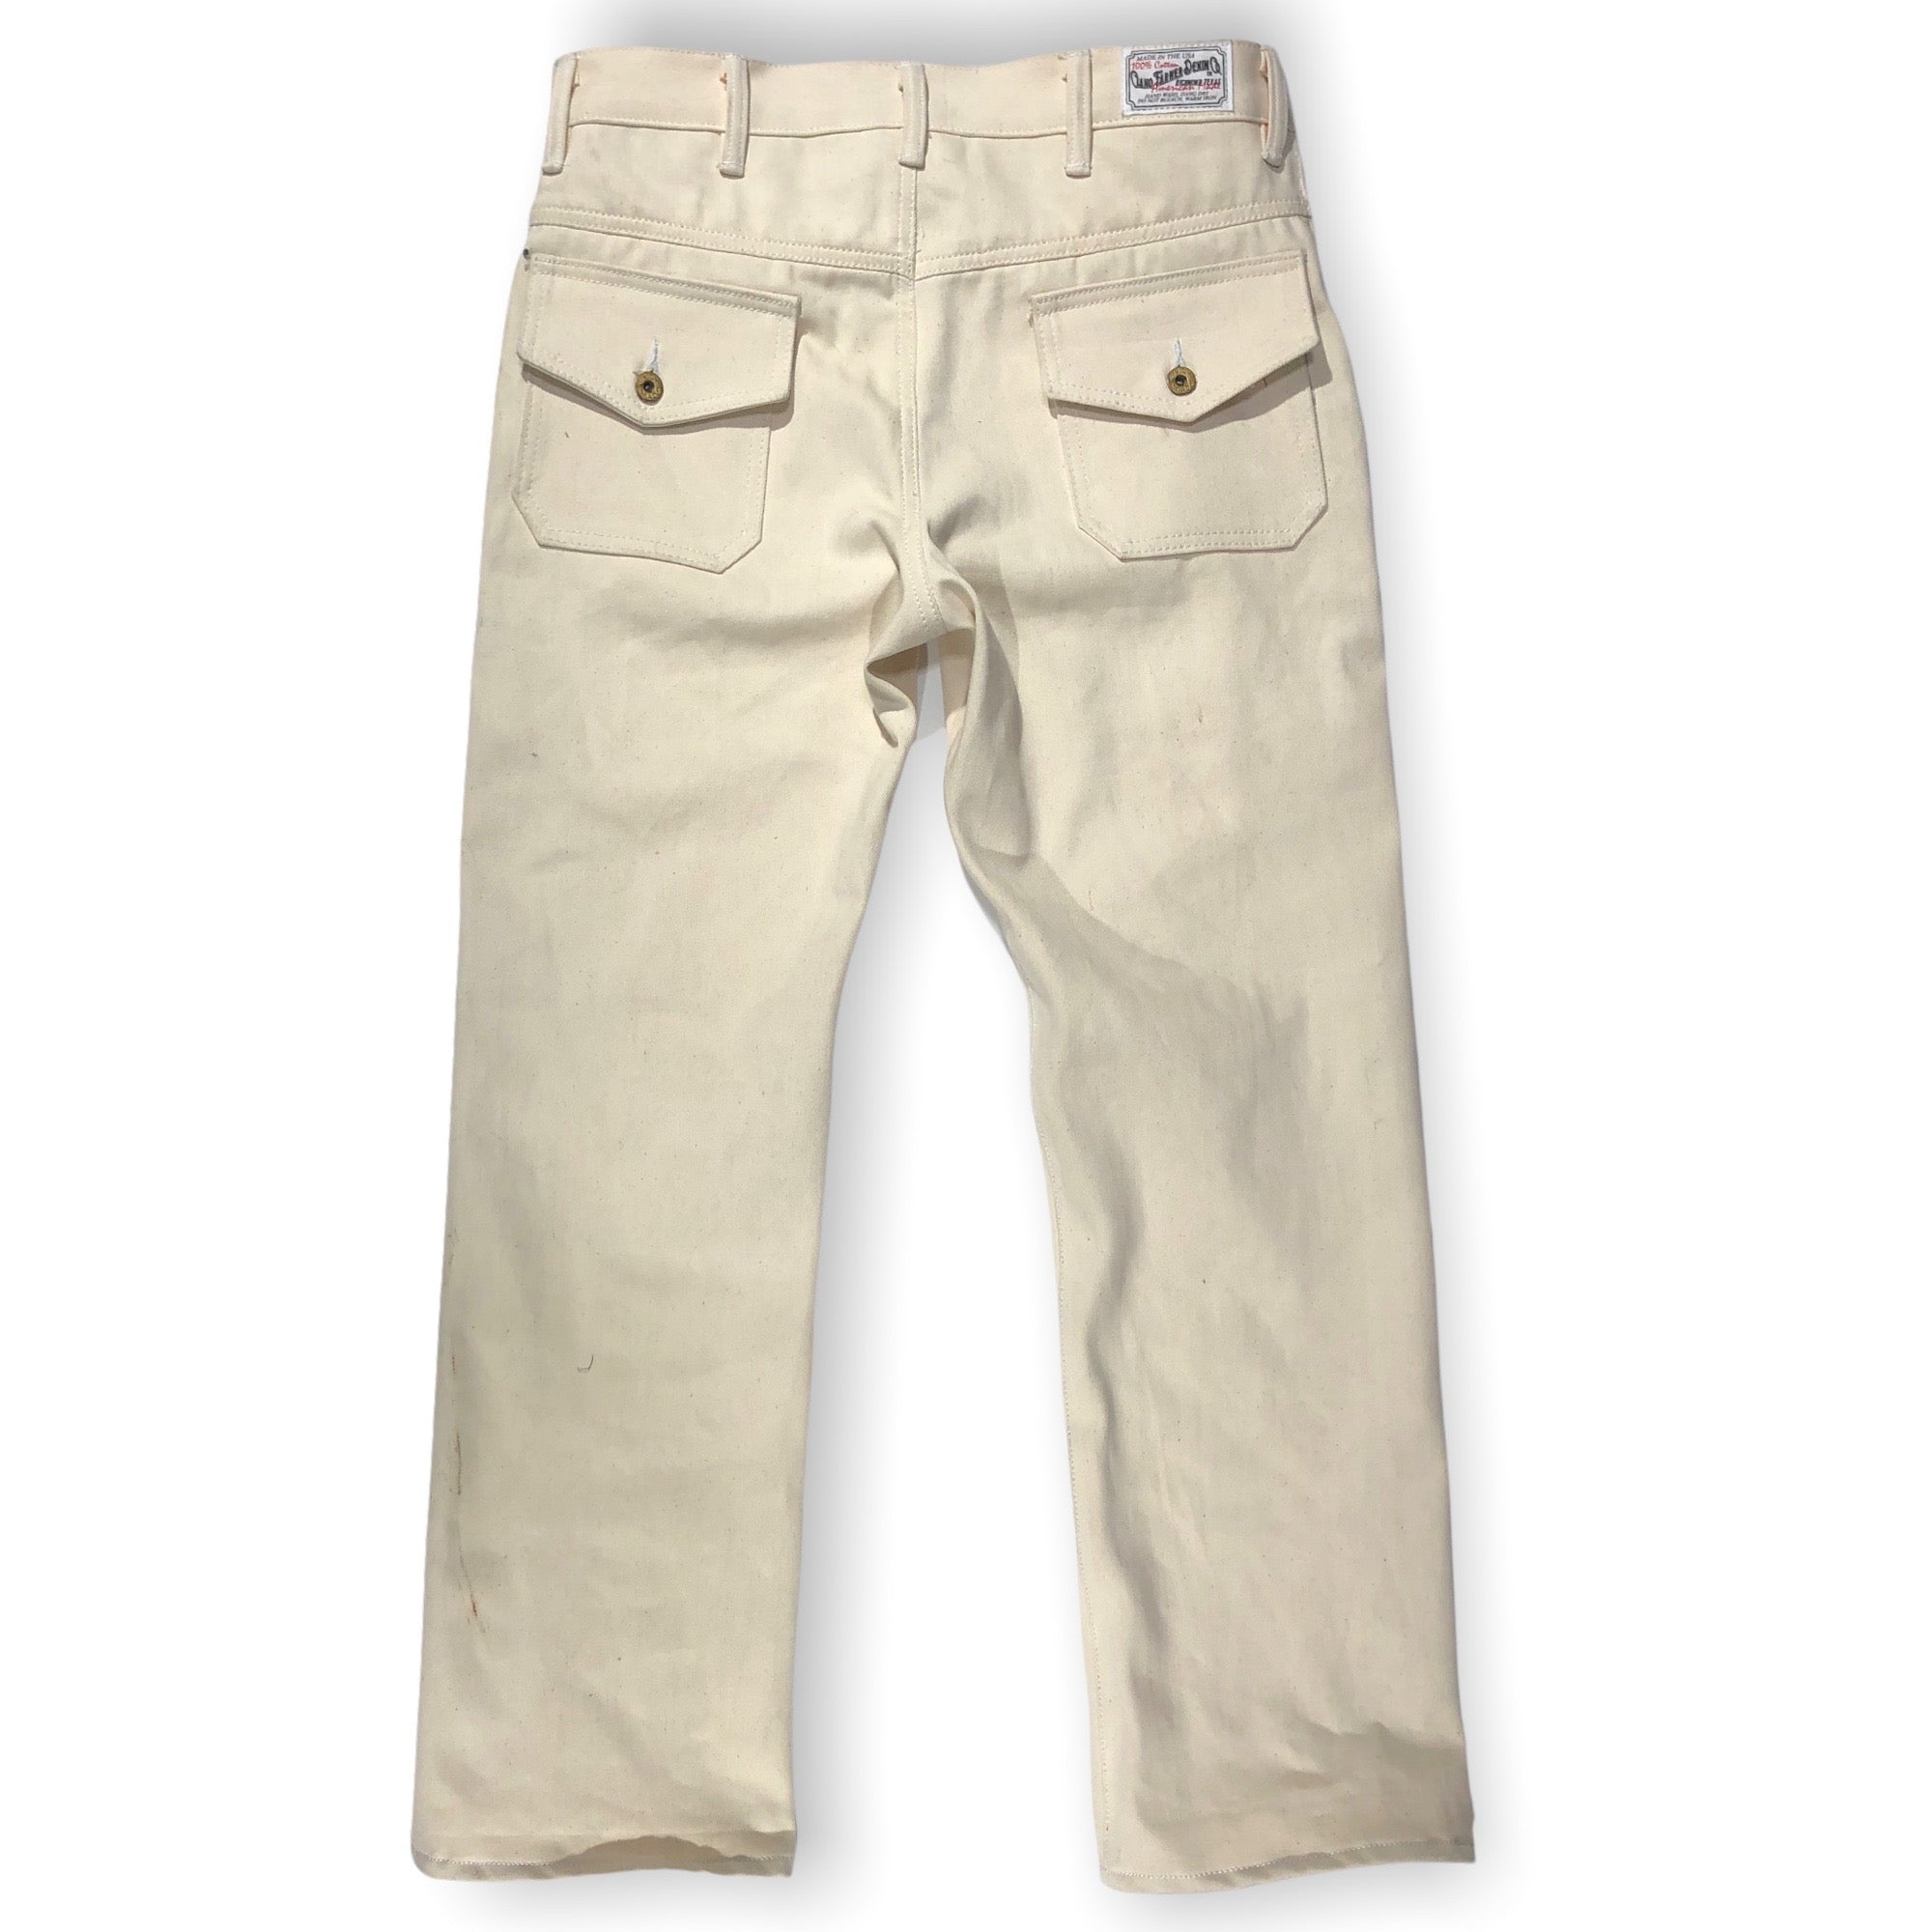 Cone Mills 14oz Natural in 1960's LEE® "Womens" Jeans